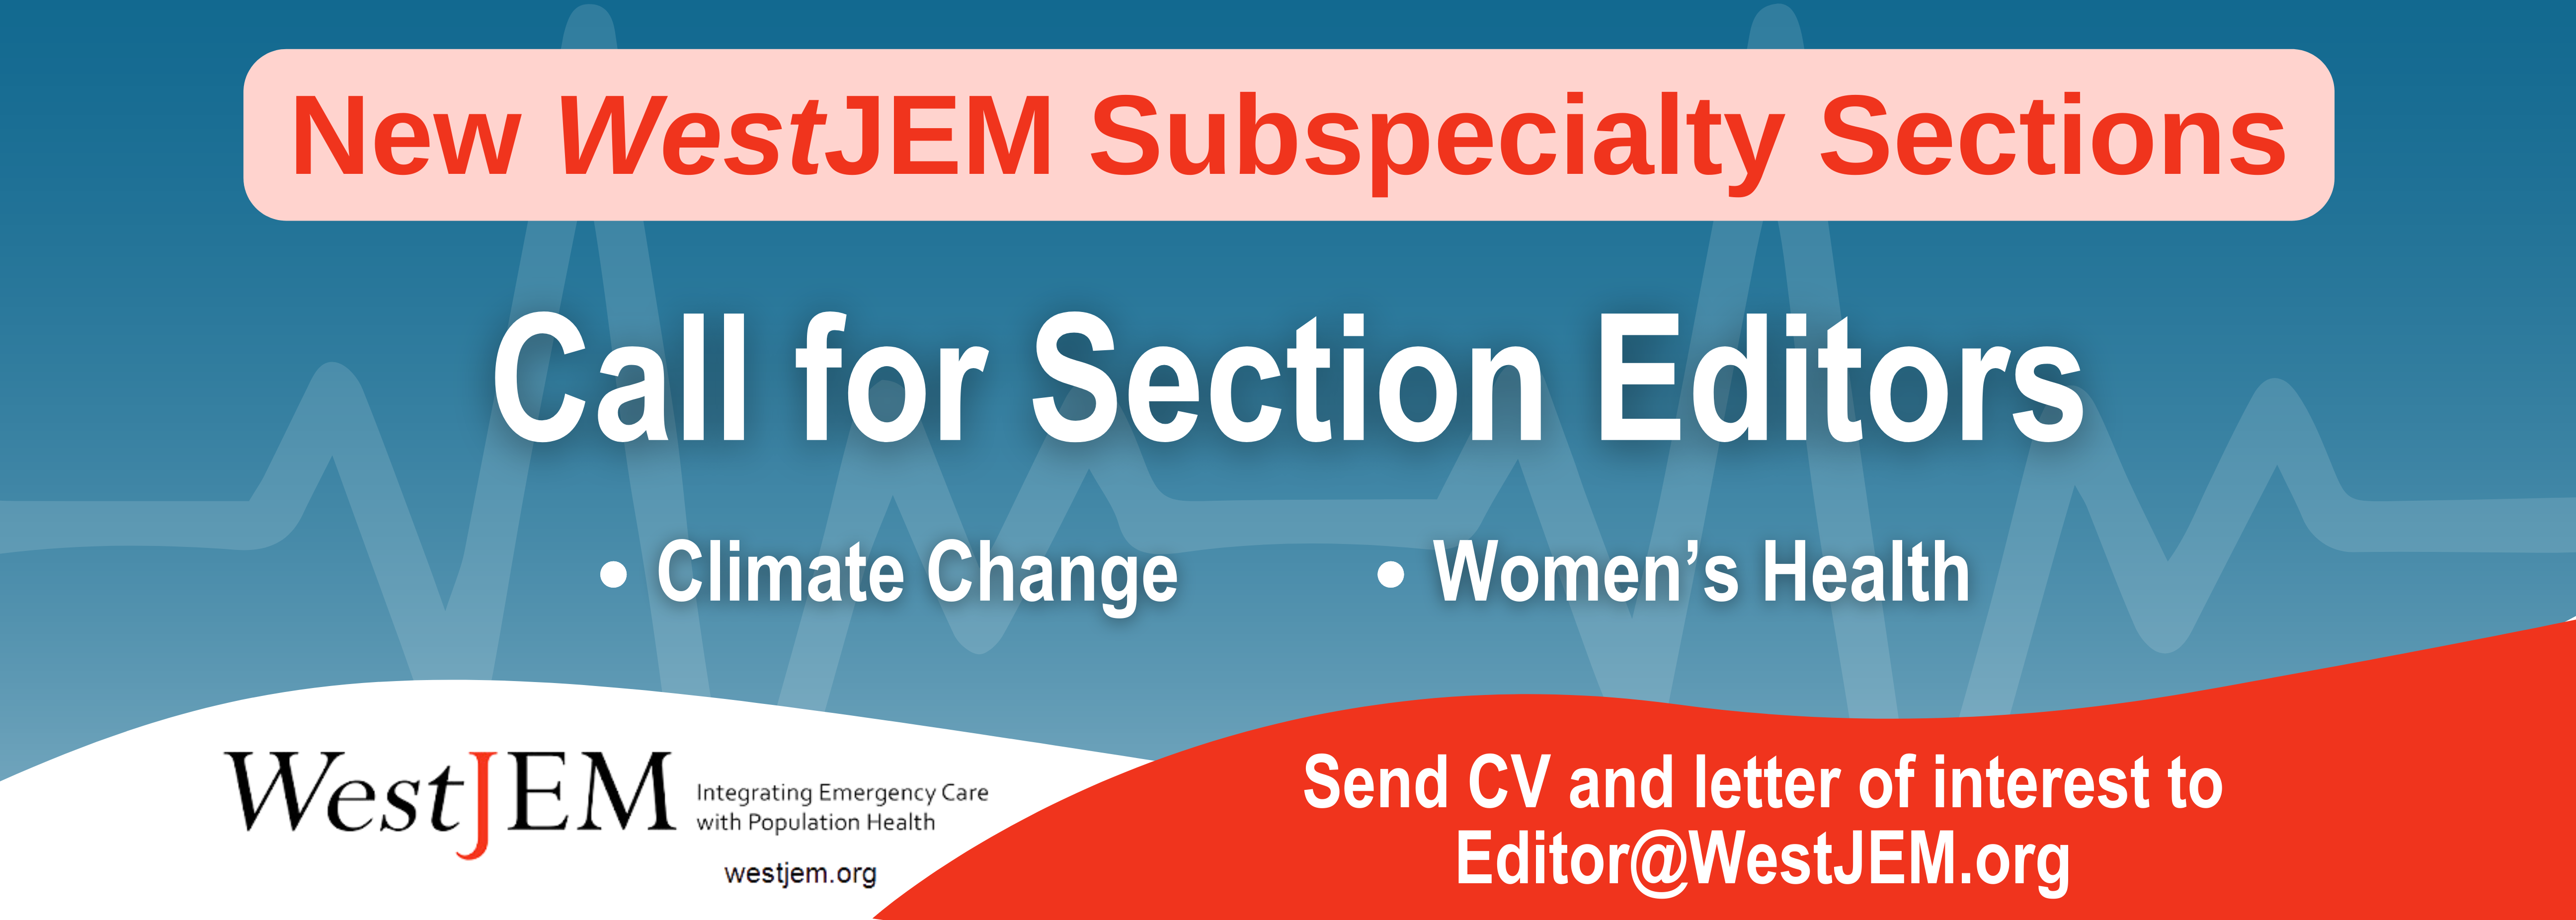 New WJ Subspecialty Sections – New